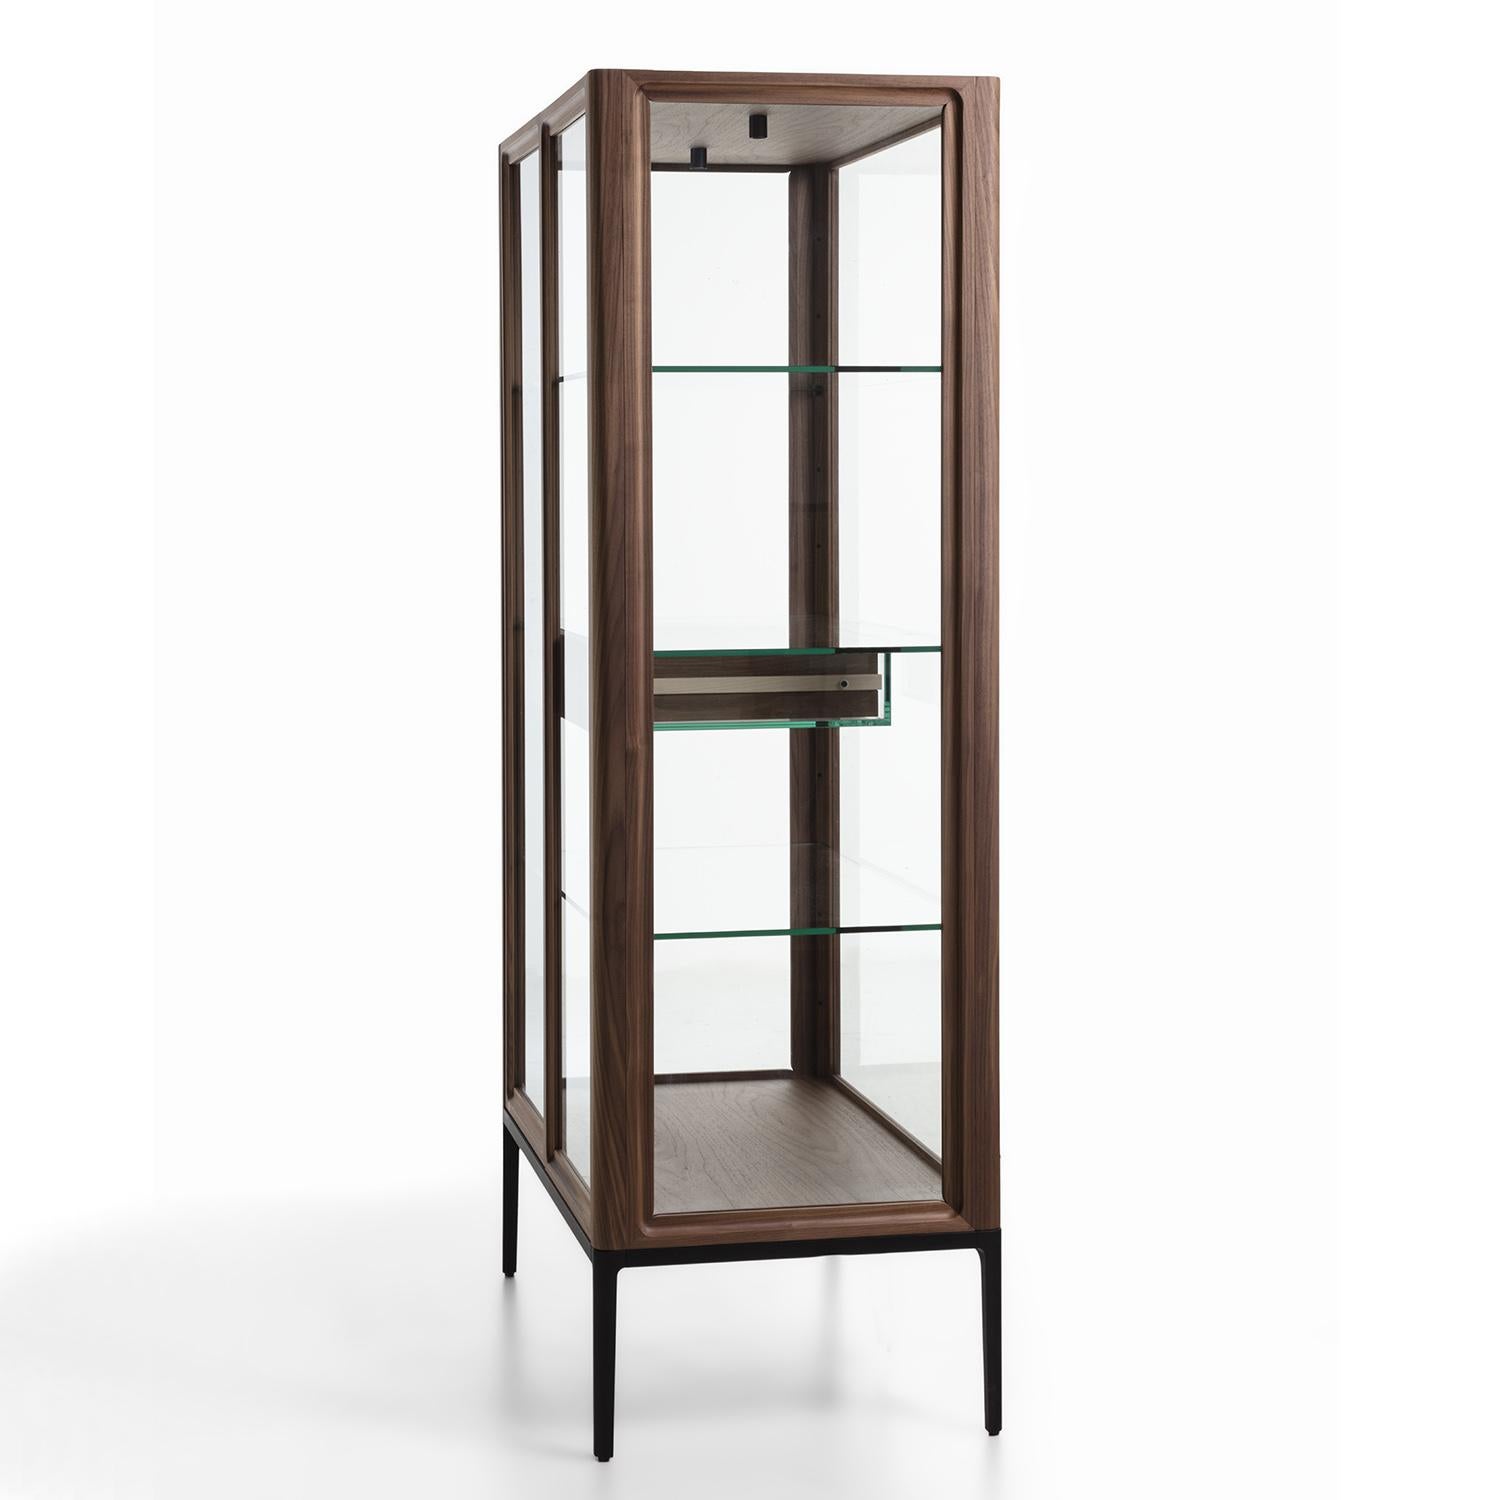 Cabinet Linea with structure in solid walnut, with clear glass
doors and clear glass shelves. With metal base in matt black finish.
Intside drawer in solid walnut with rails in solid maple in natural finish. 
The drawer including 2 trays in solid